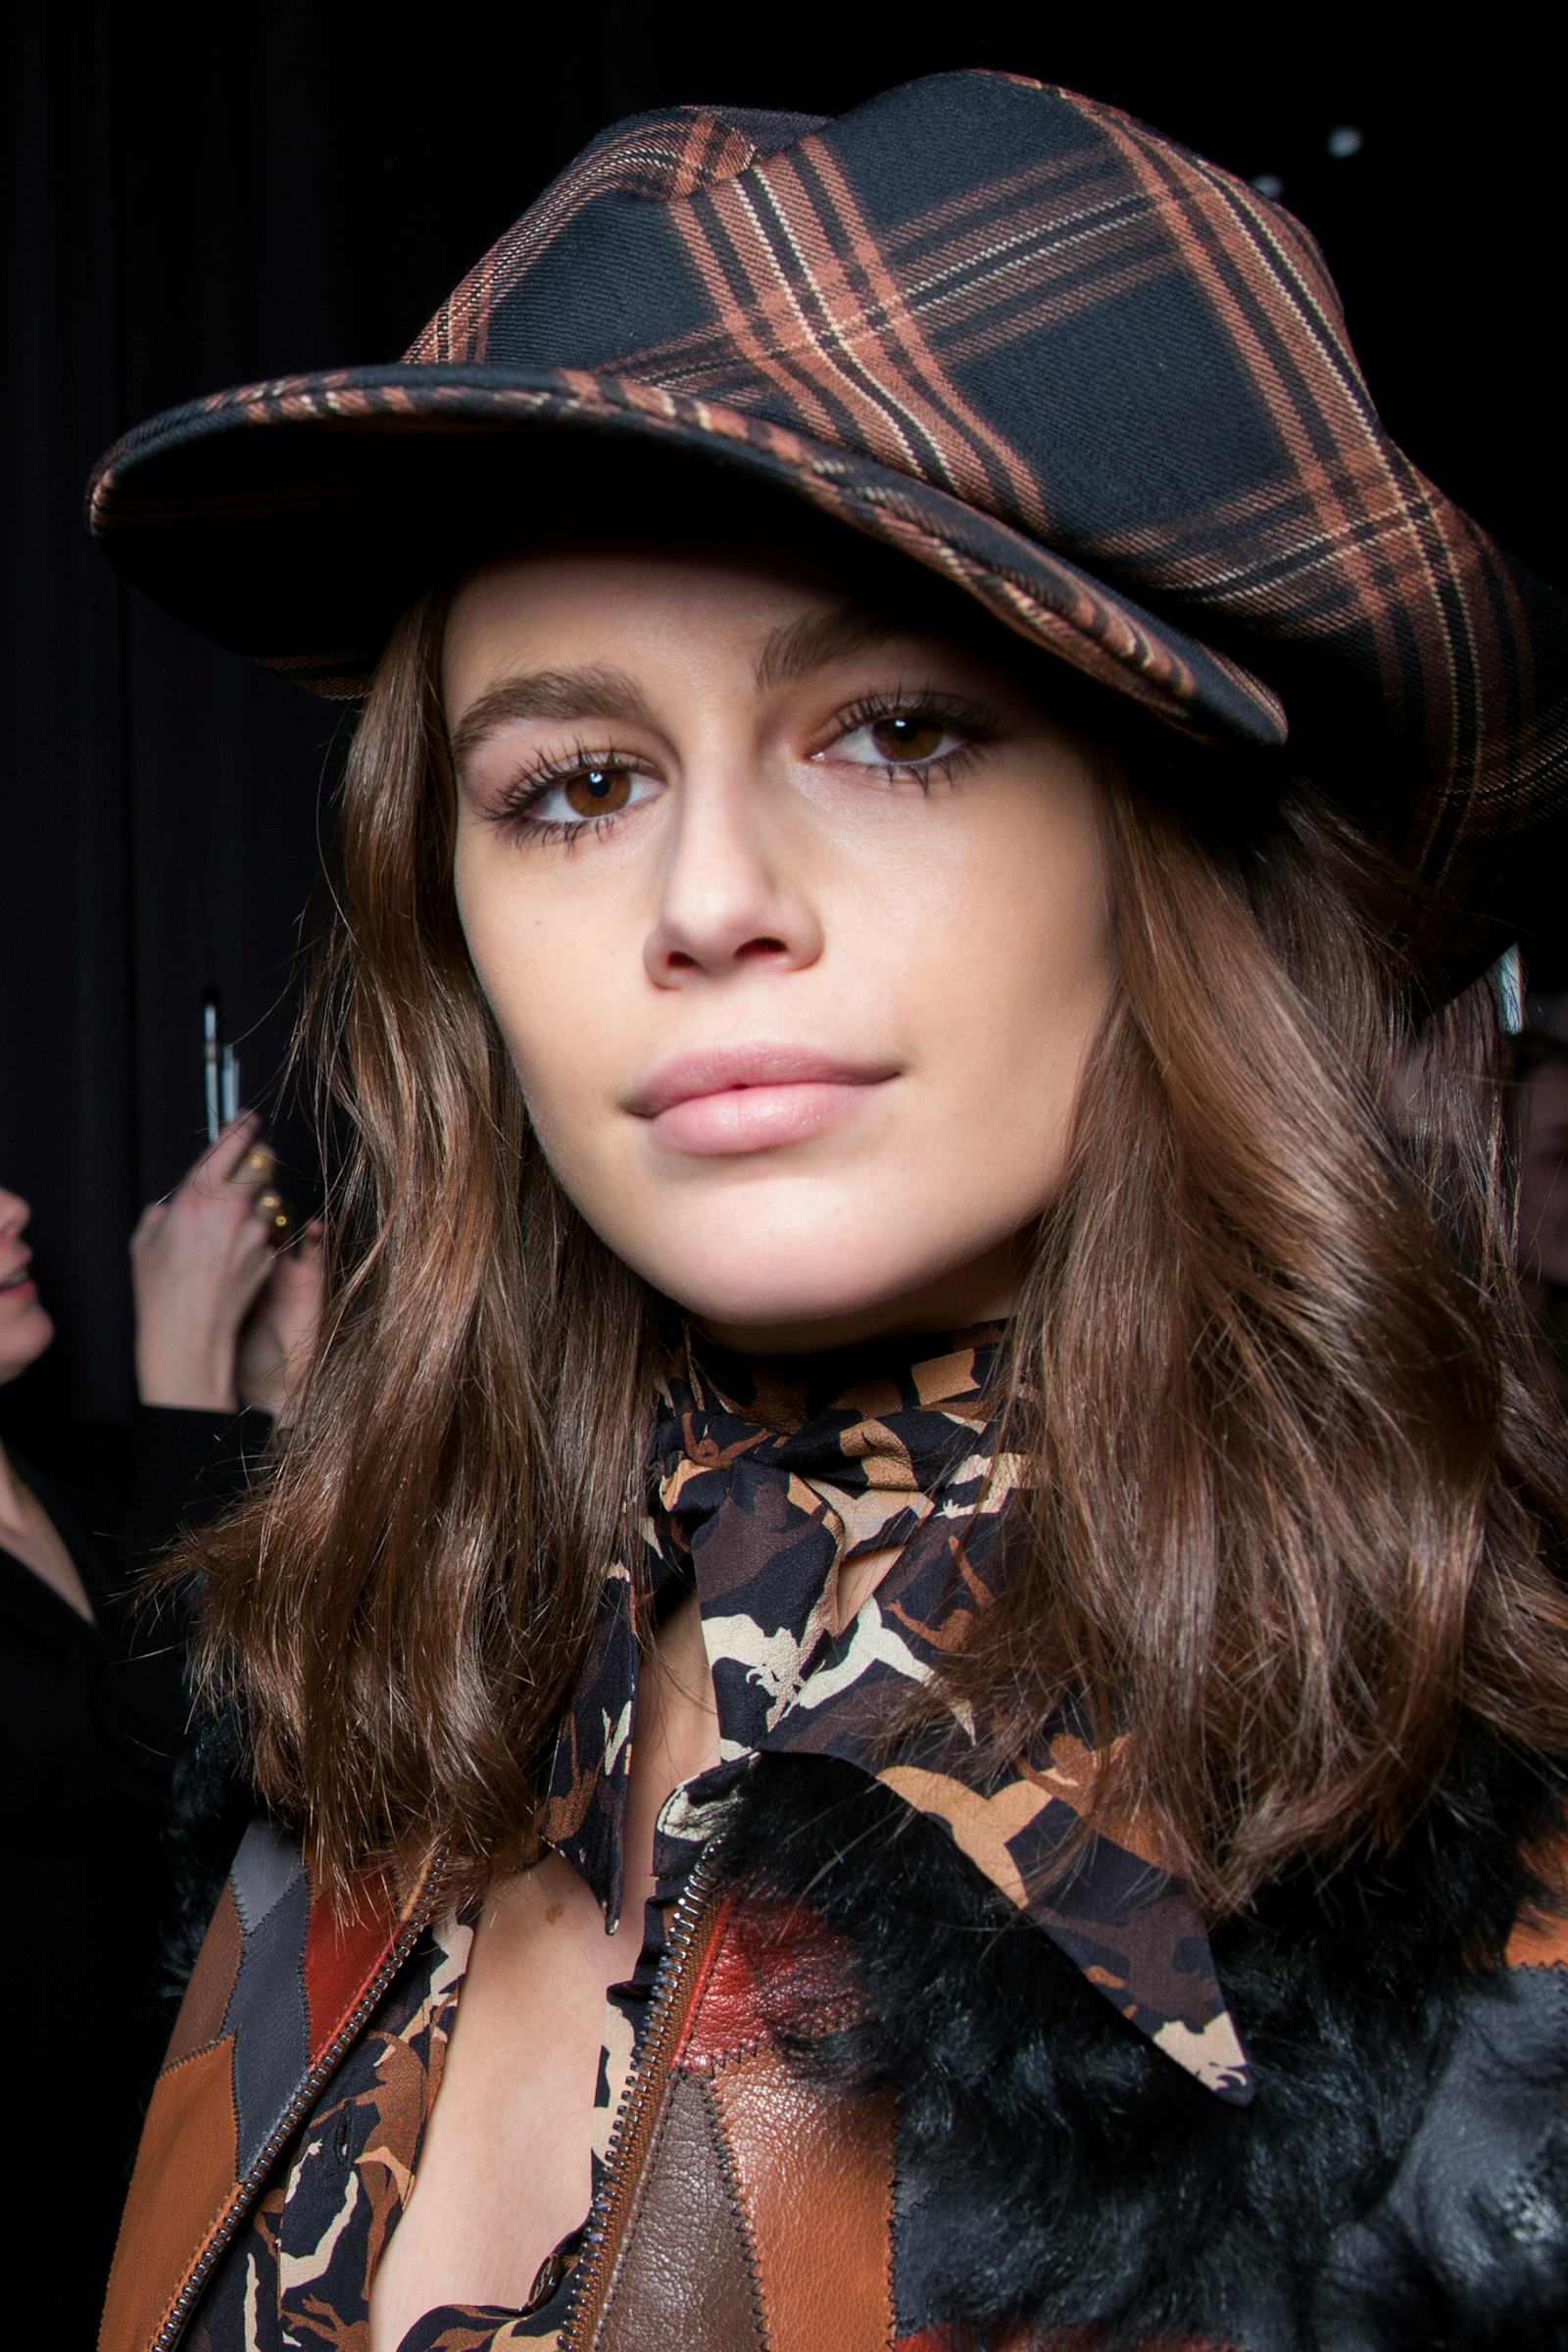 The ’70s Beauty Trends That Ruled NYFW Fall 2019 Are Timeless